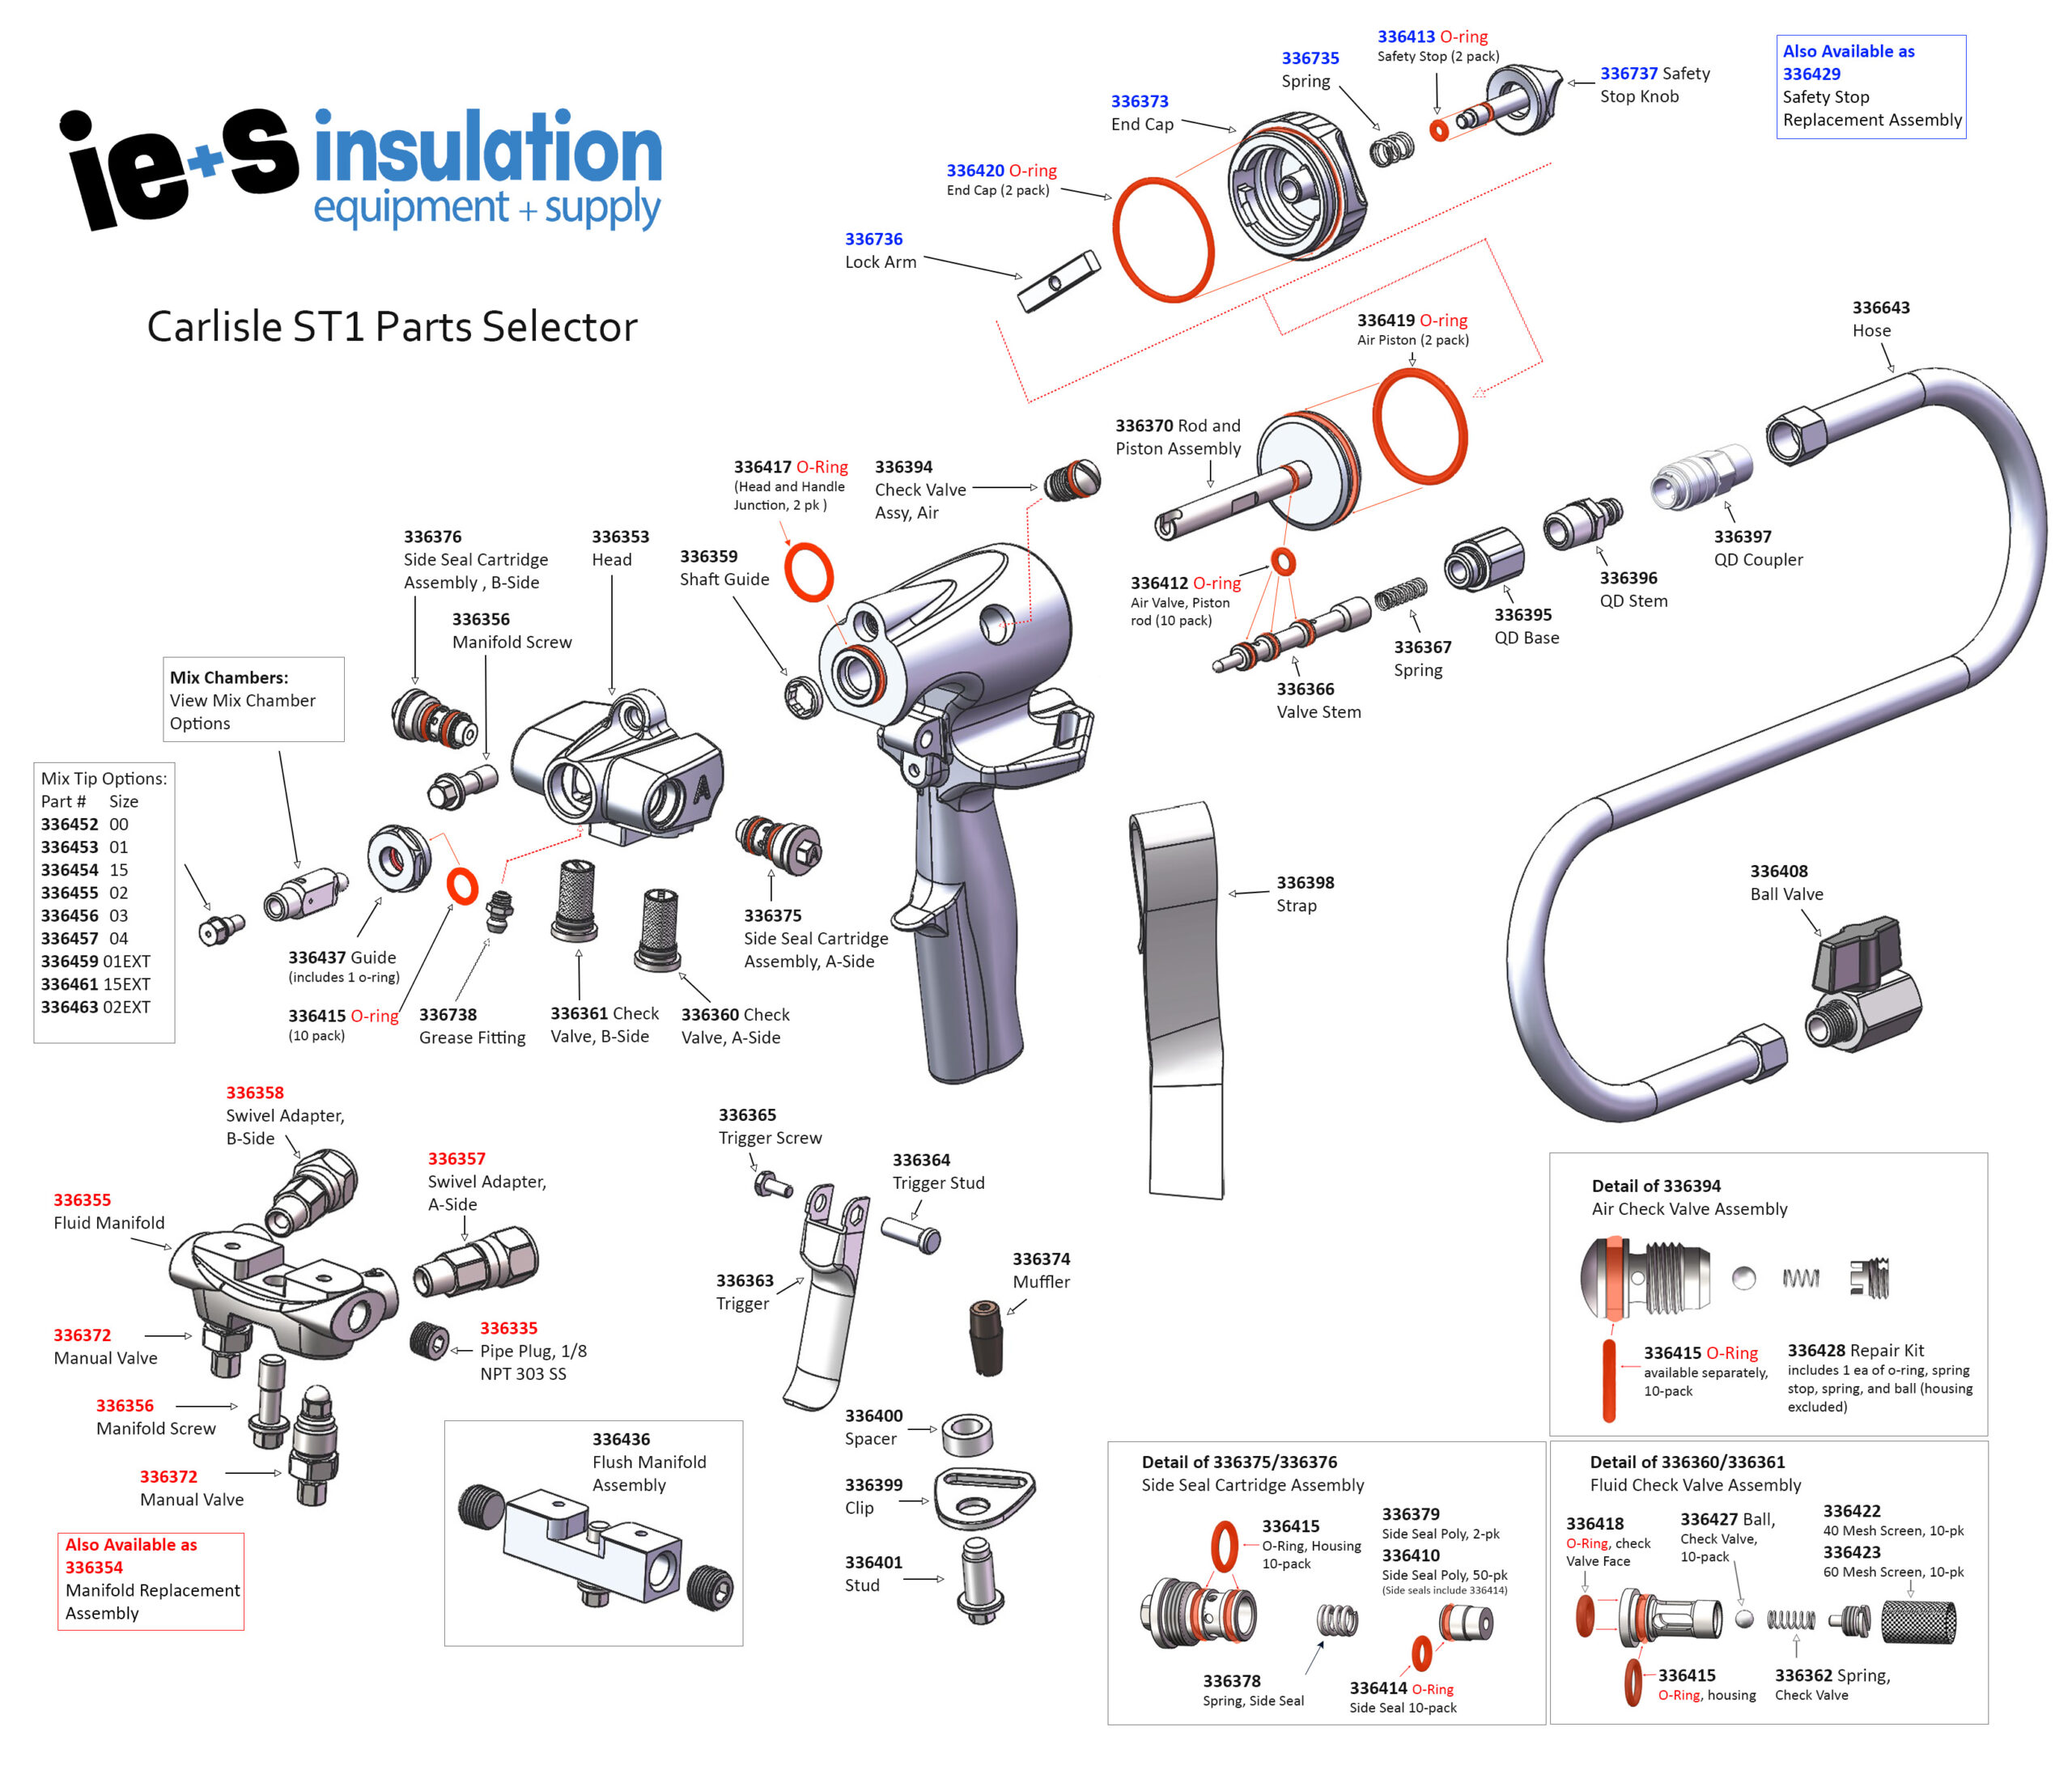 ST1 Parts Selector